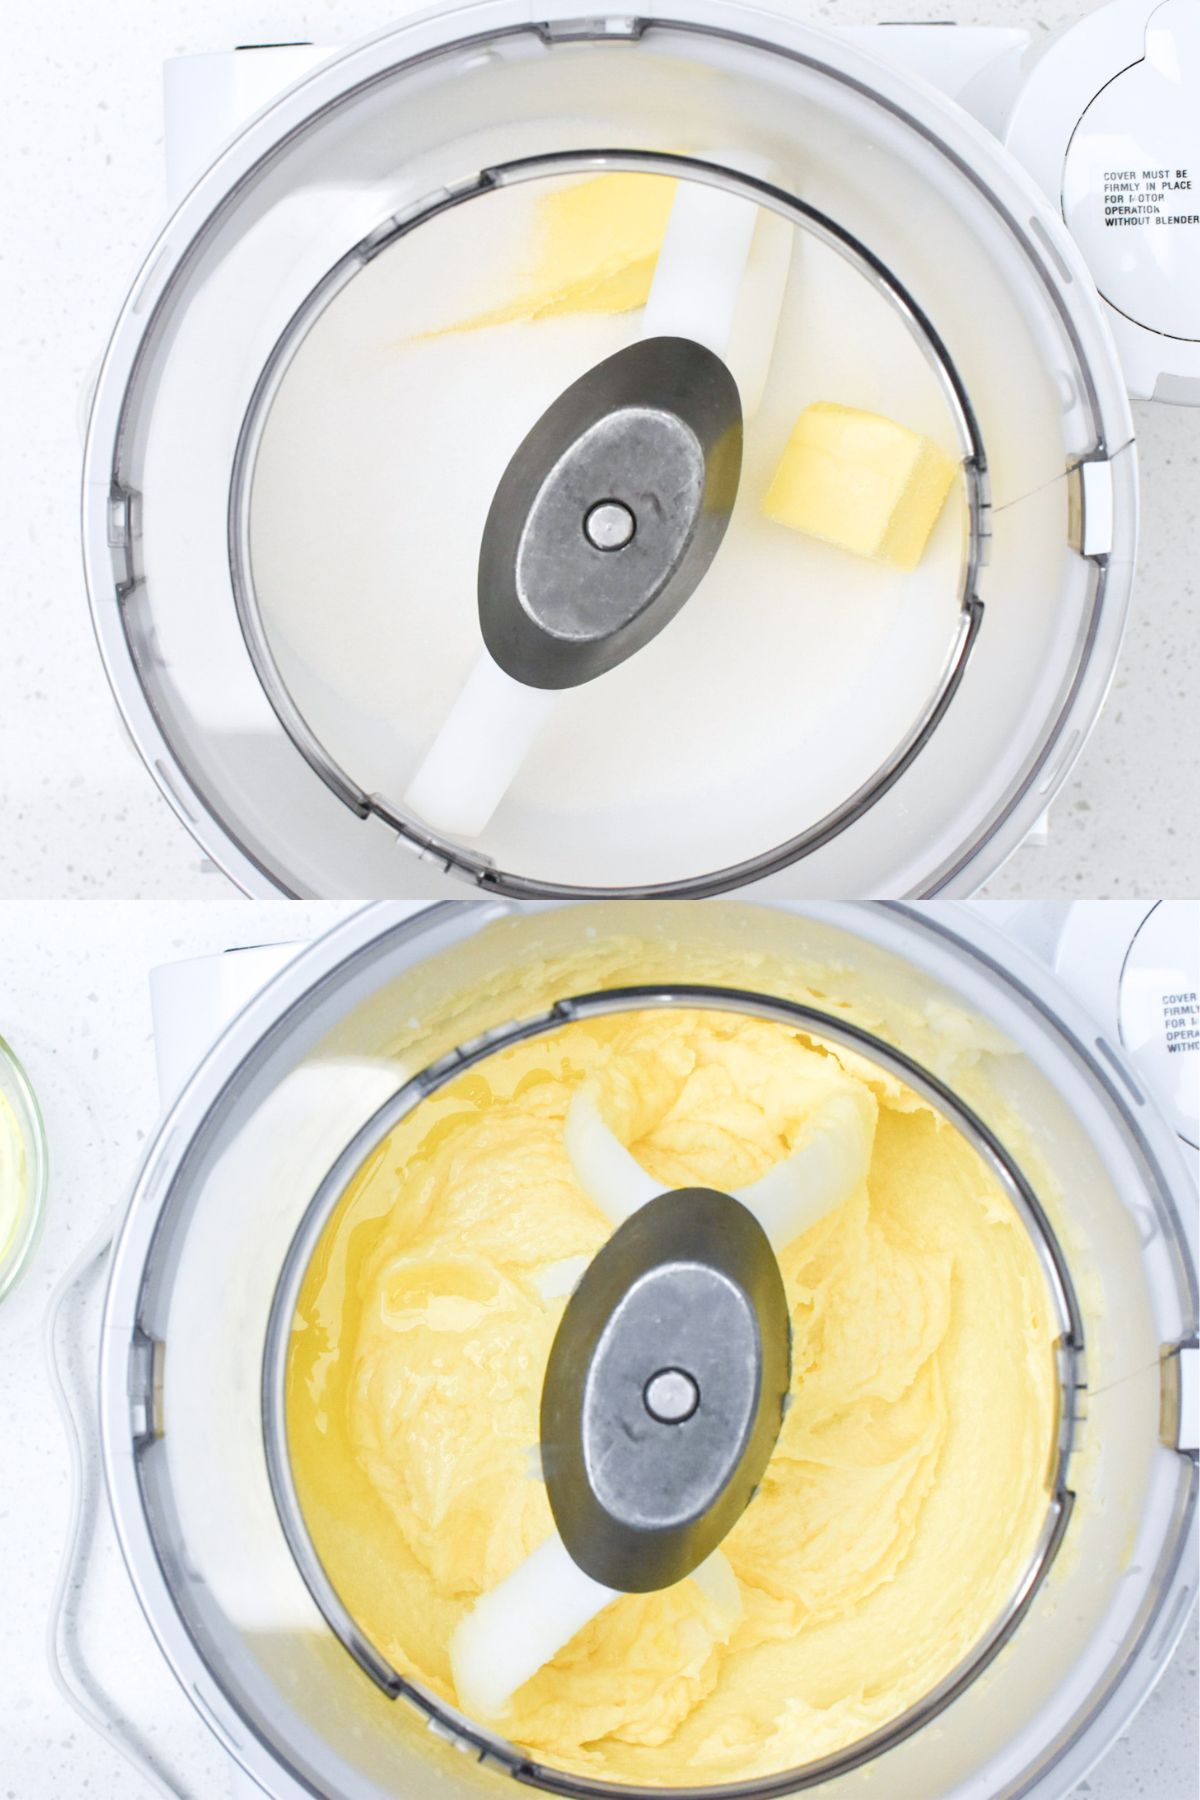 Butter and sugar being added to a mixer for cake batter.